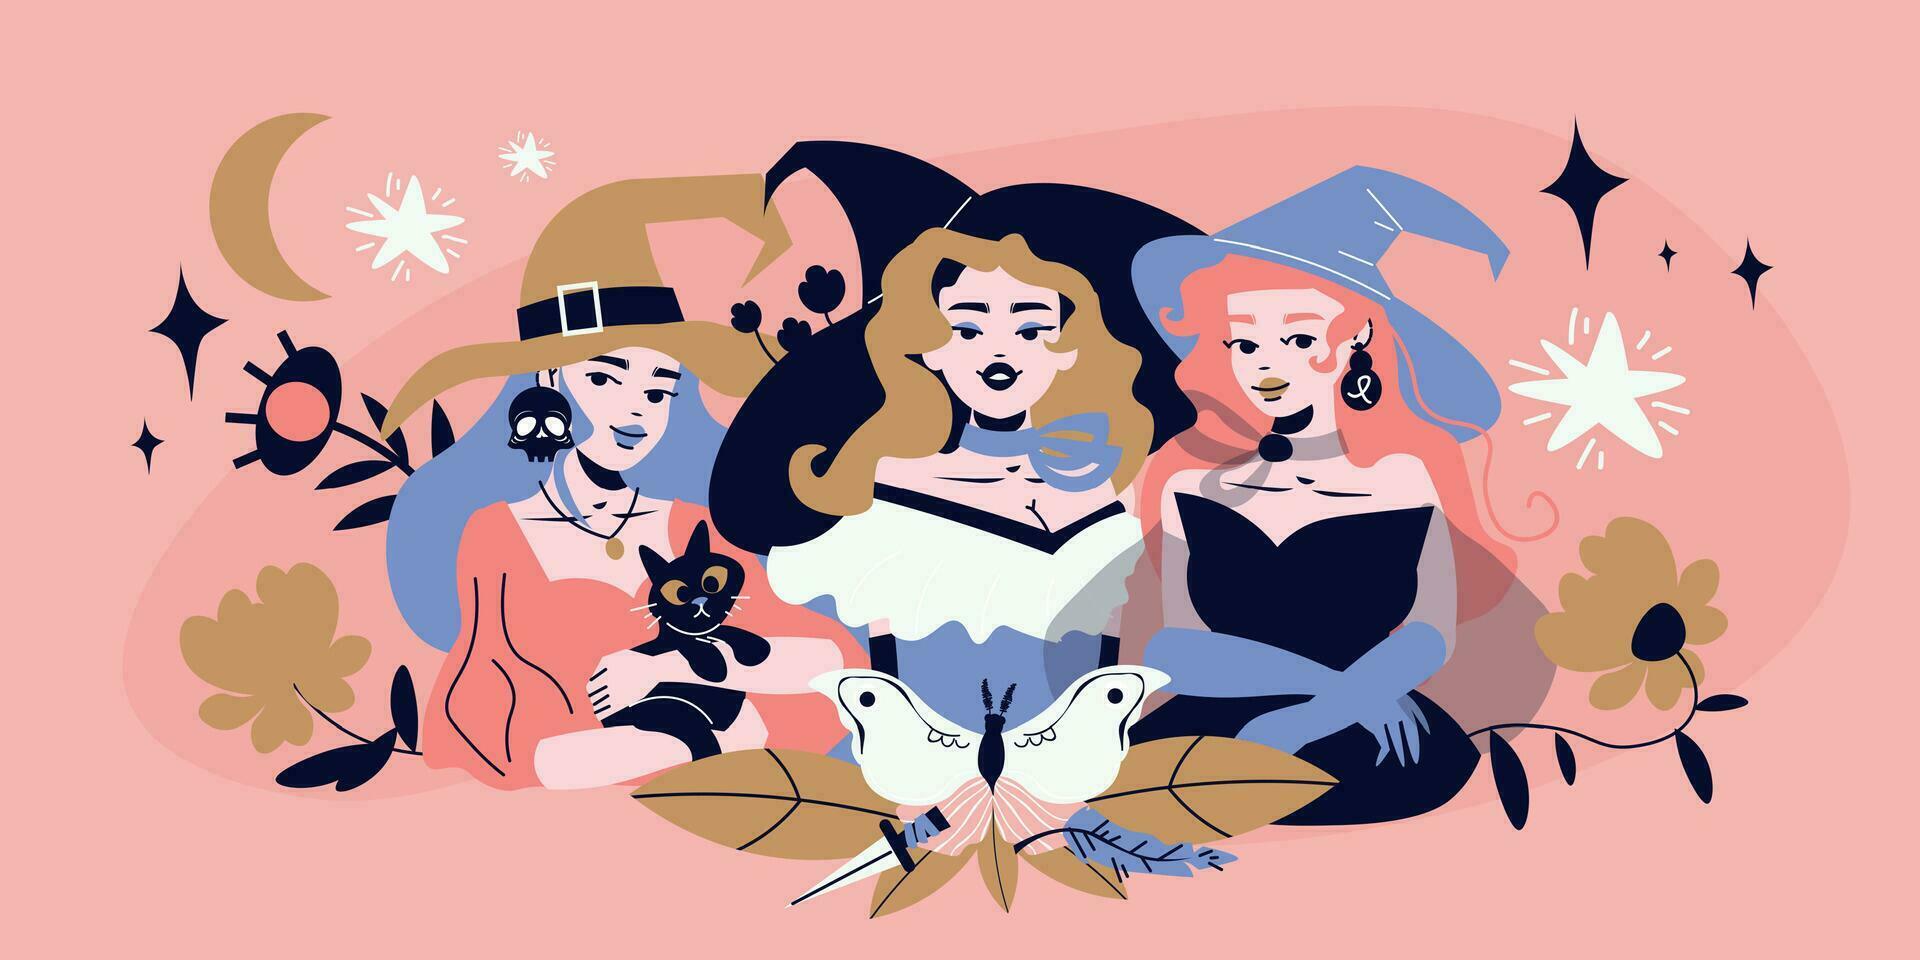 Witches Mystery Flat Illustration vector